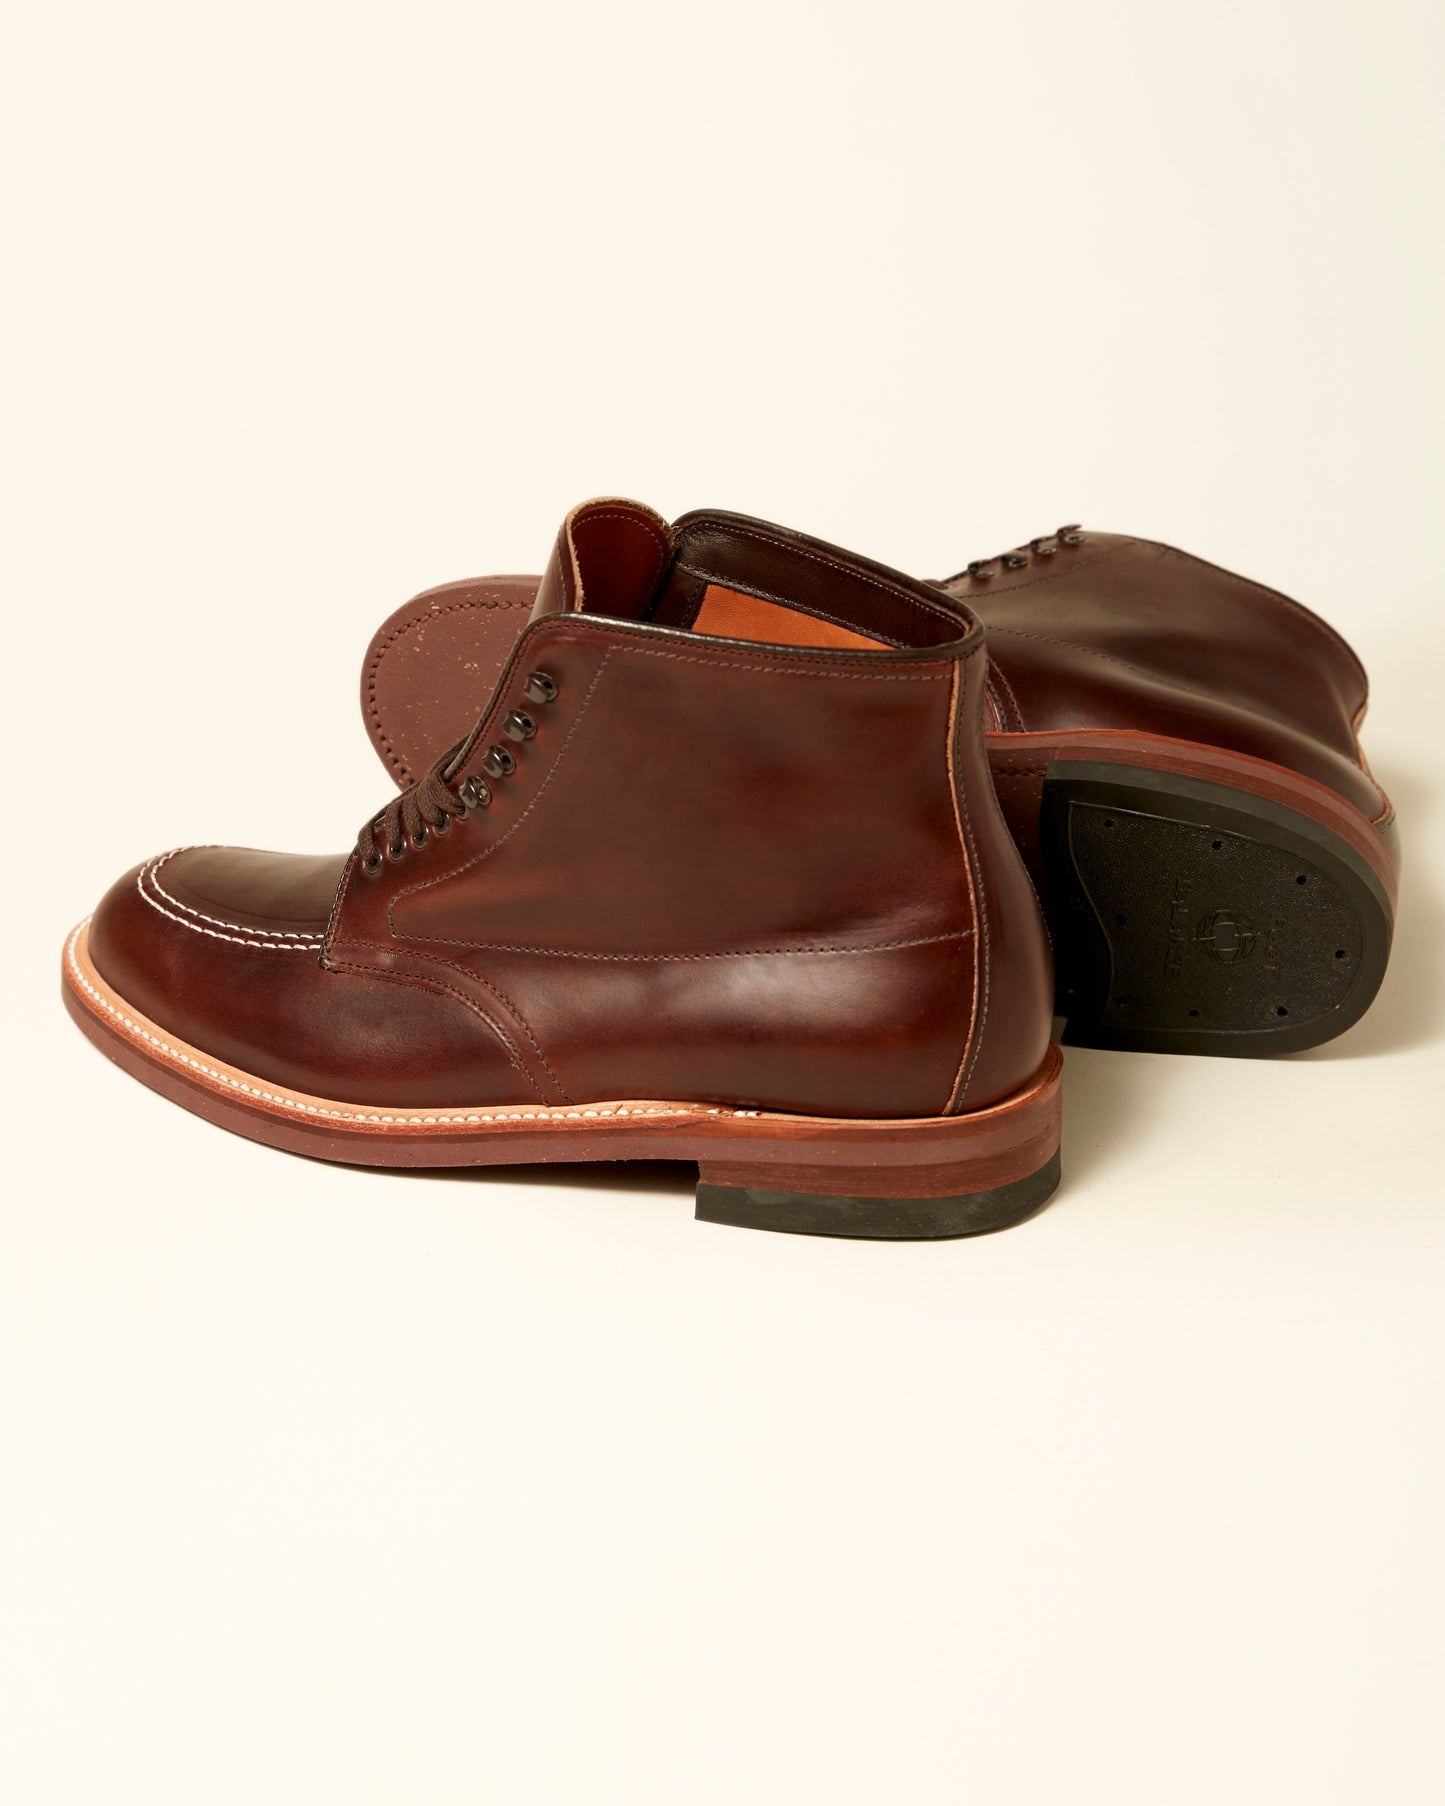 403 Indy Boot in Brown Chromexcel, Trubalance Last